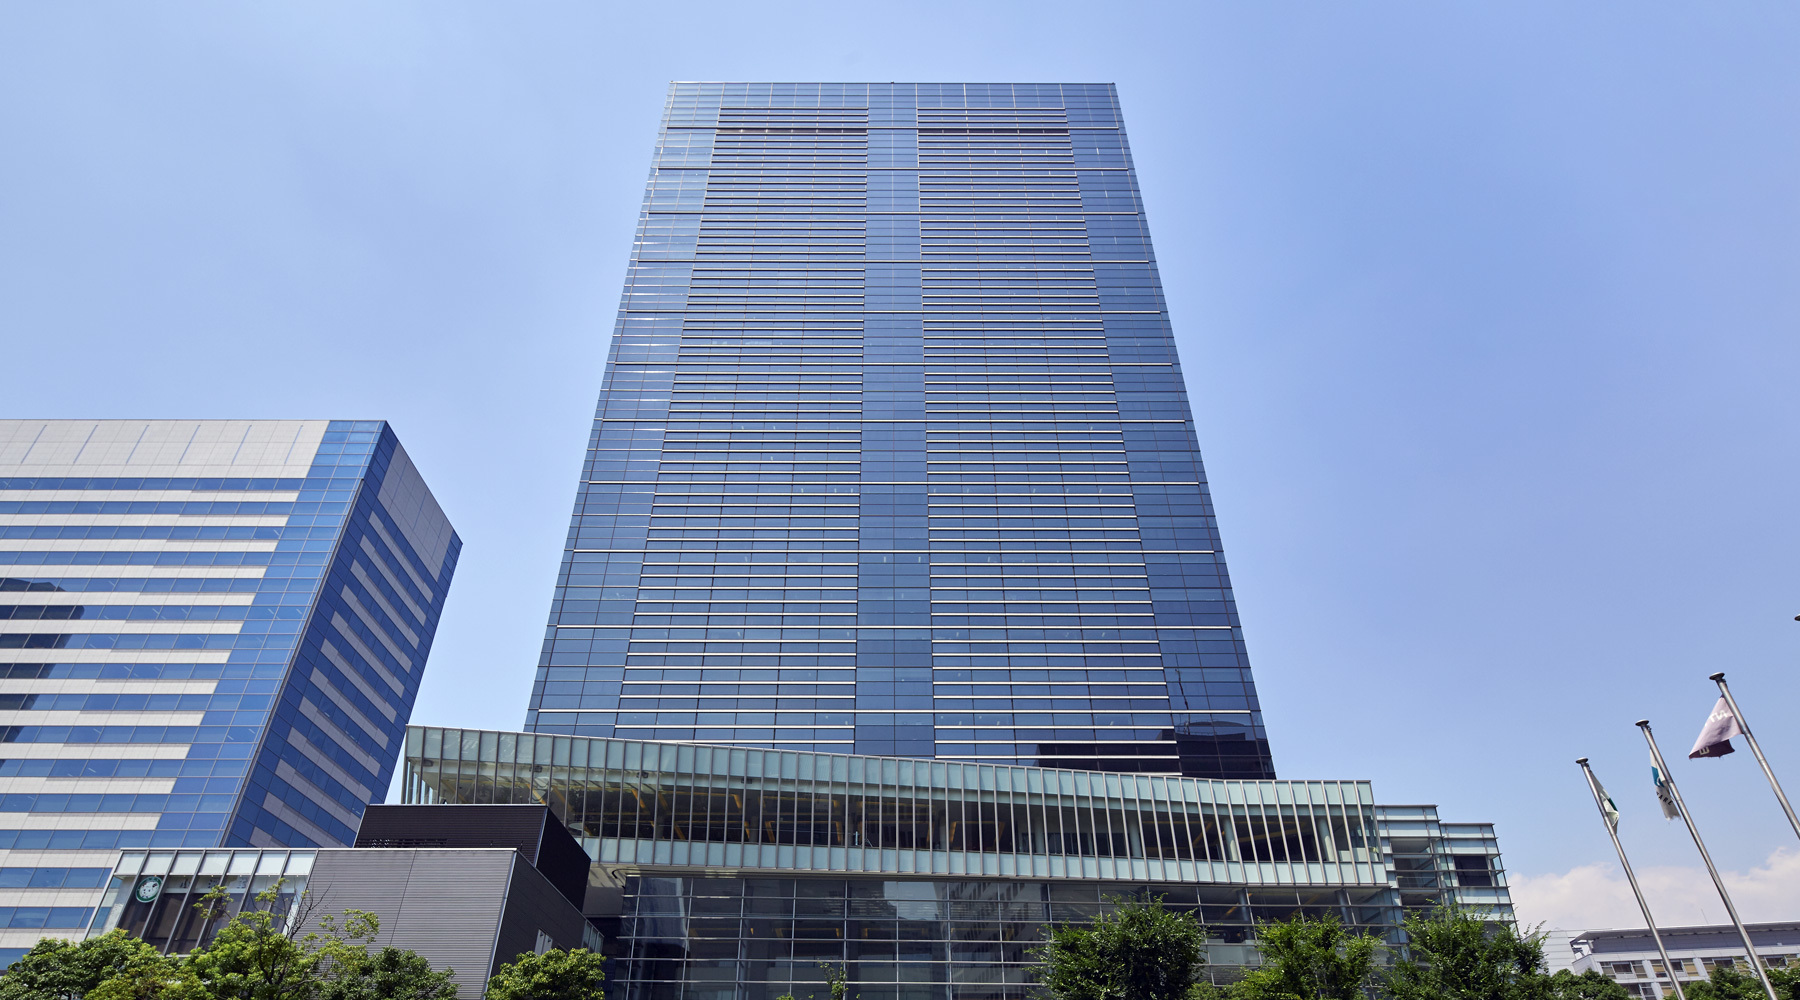 Exterior_Area Shinagawa, a high-grade office building owned by NTT Data Corporation, with pedestrian deck for stress-free entry even on rainy days.